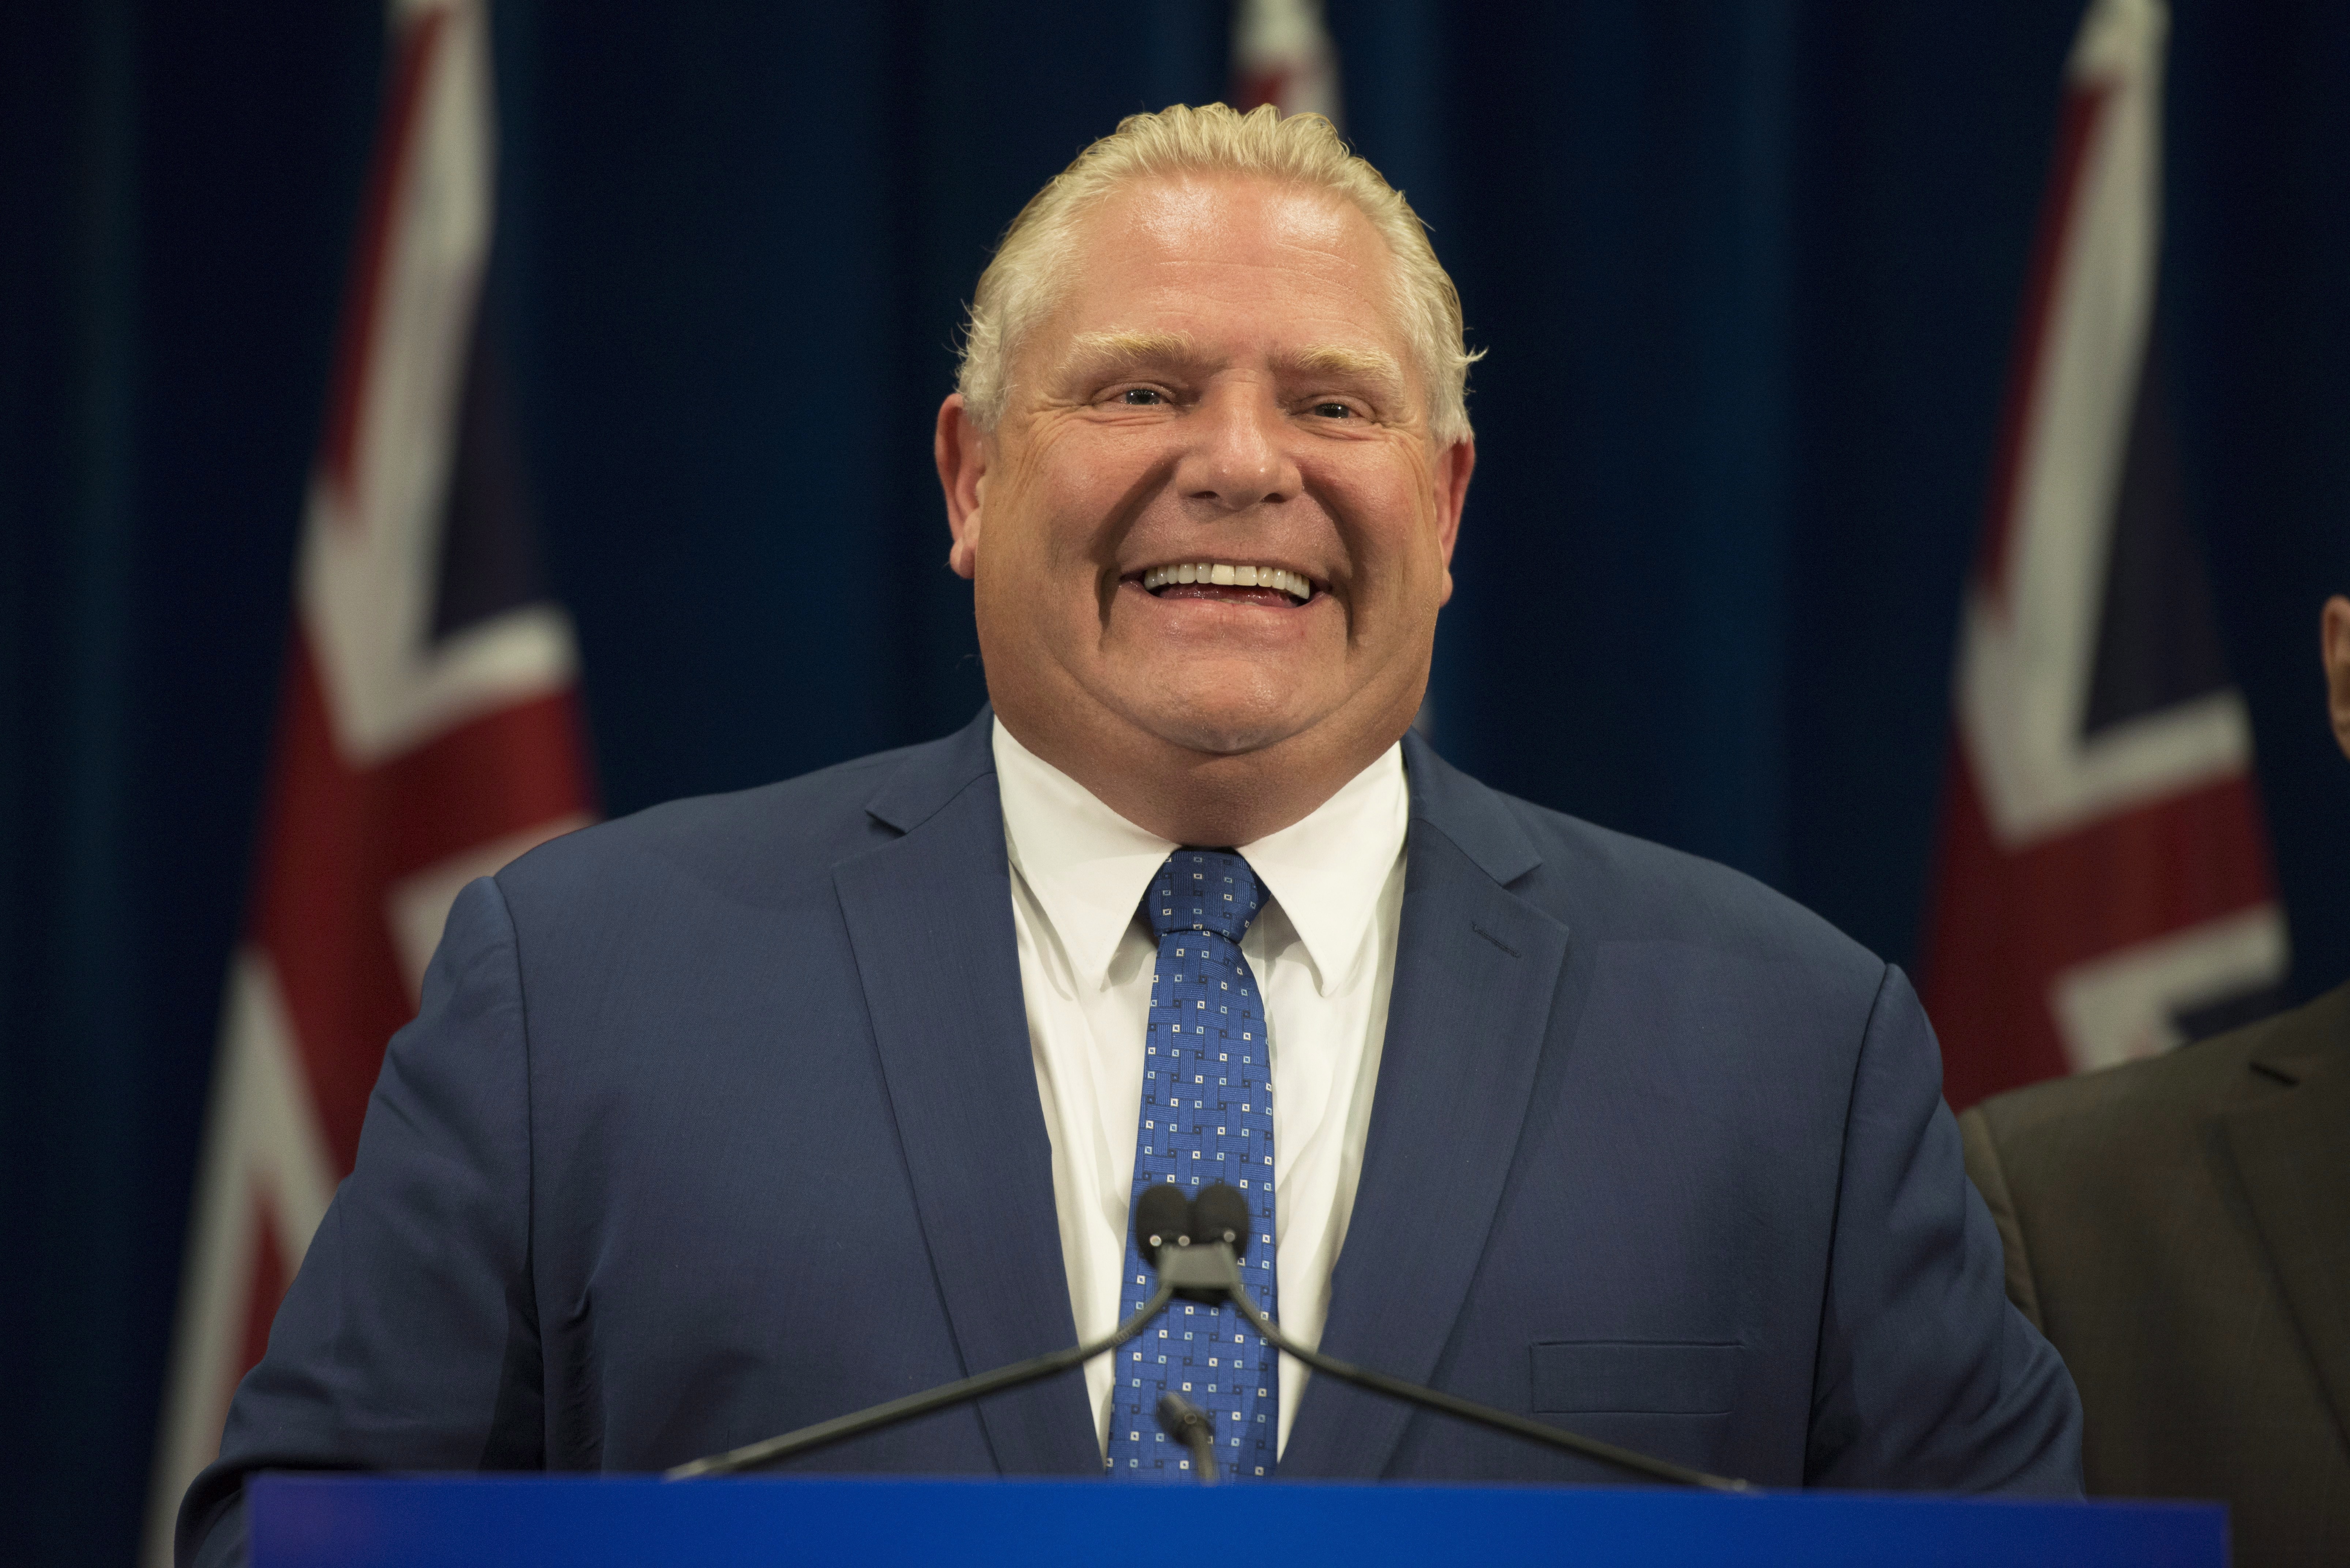 doug-ford-pitching-ontario-as-electric-vehicle-leader-but-not